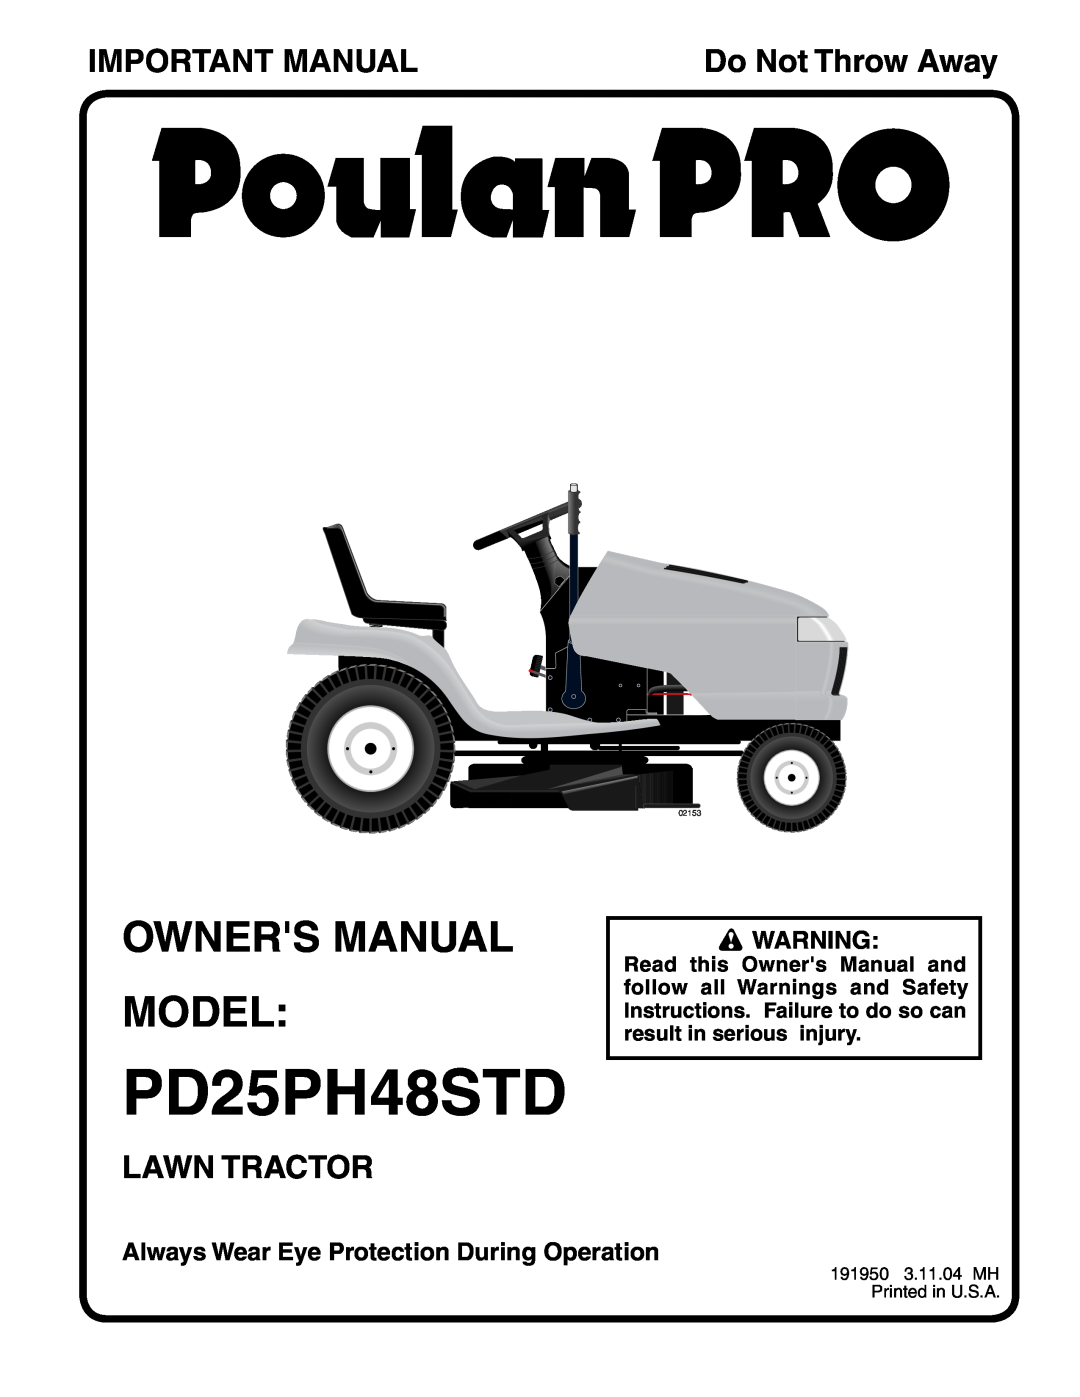 Poulan PD25PH48STD owner manual Important Manual, Lawn Tractor, Always Wear Eye Protection During Operation, 02153 